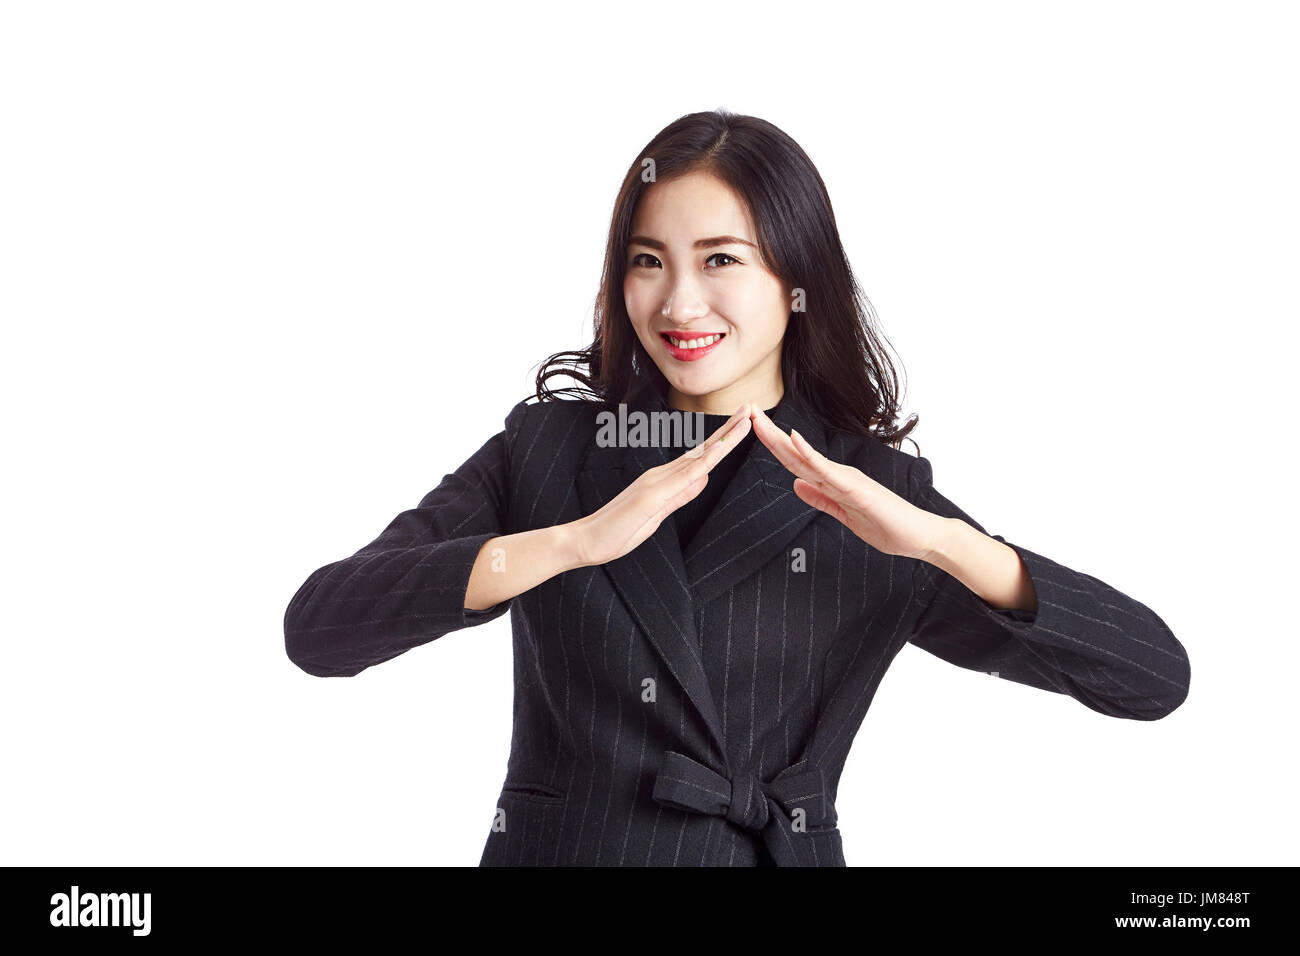 young asian real estate agent showing a roof sign, studio shot, isolated on white background. Stock Photo